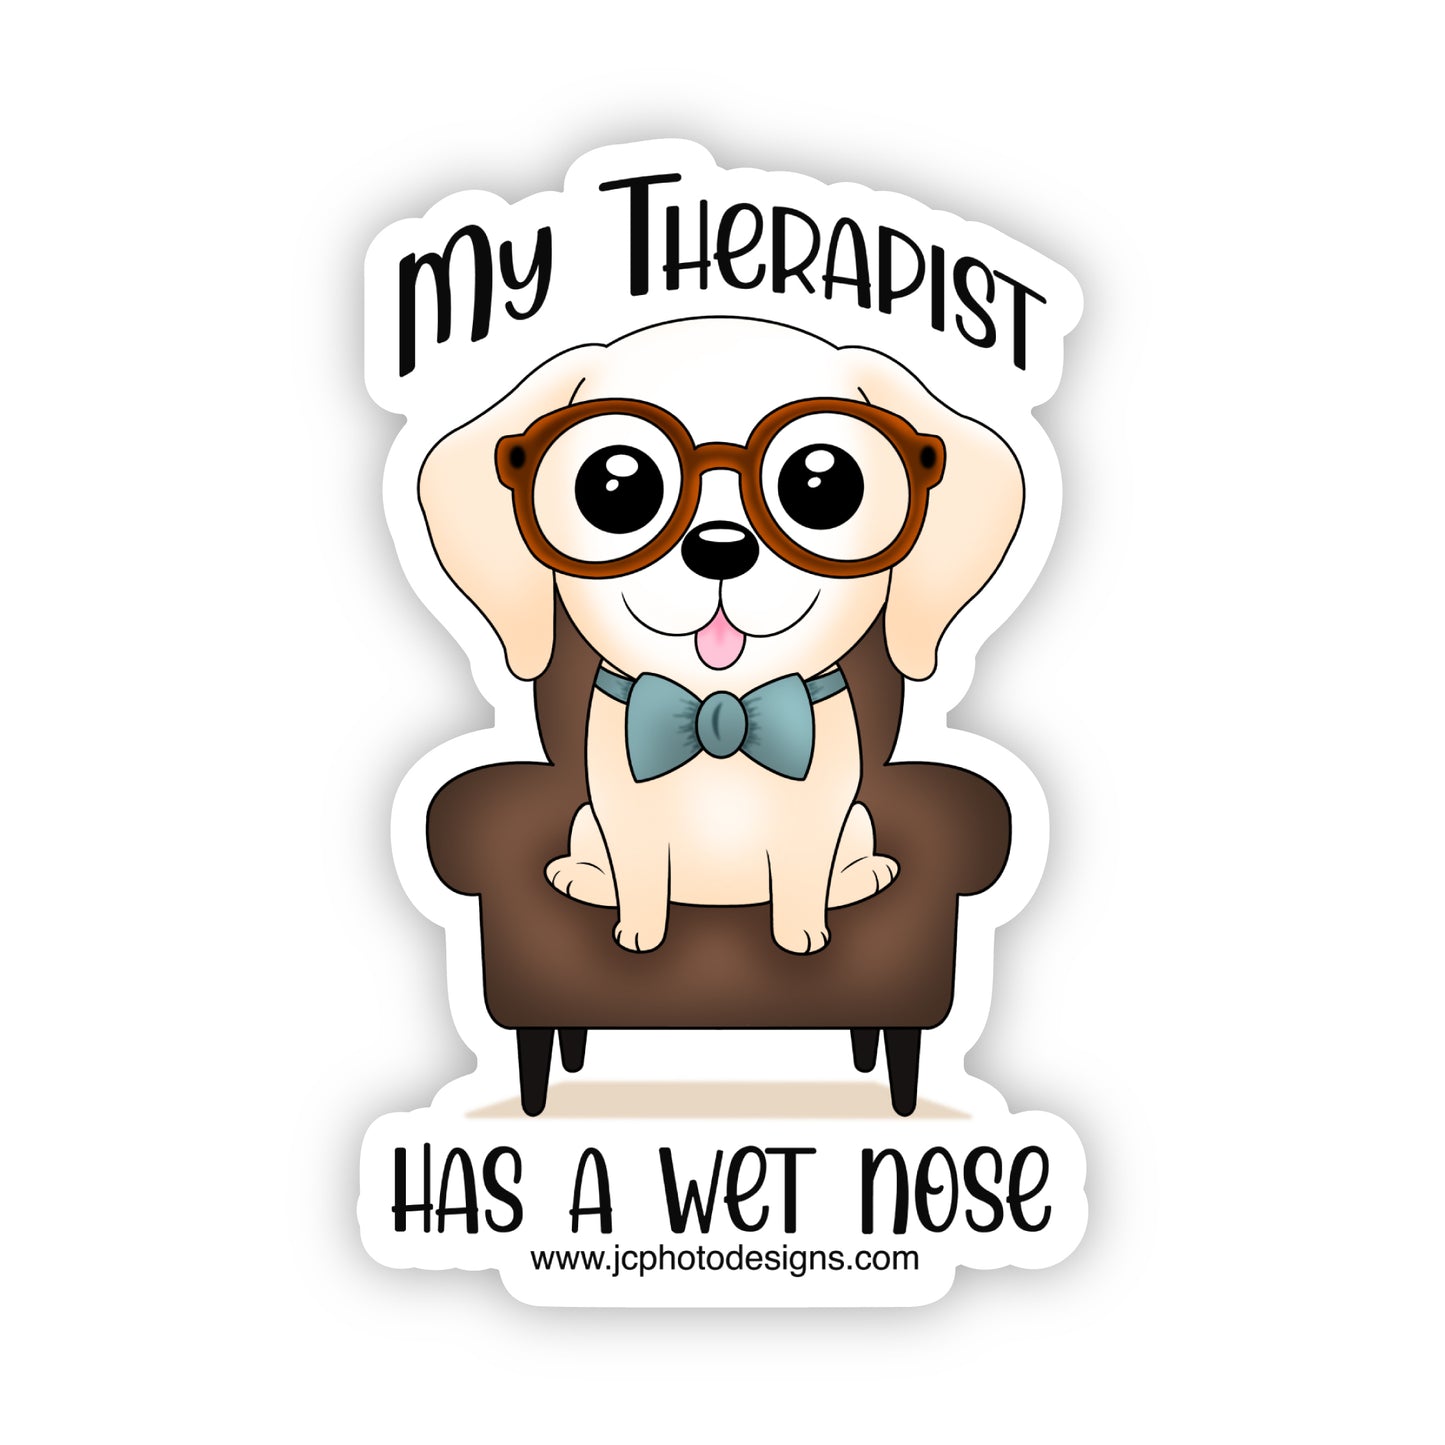 'My Therapist has a Wet Nose' sticker for the pet lover